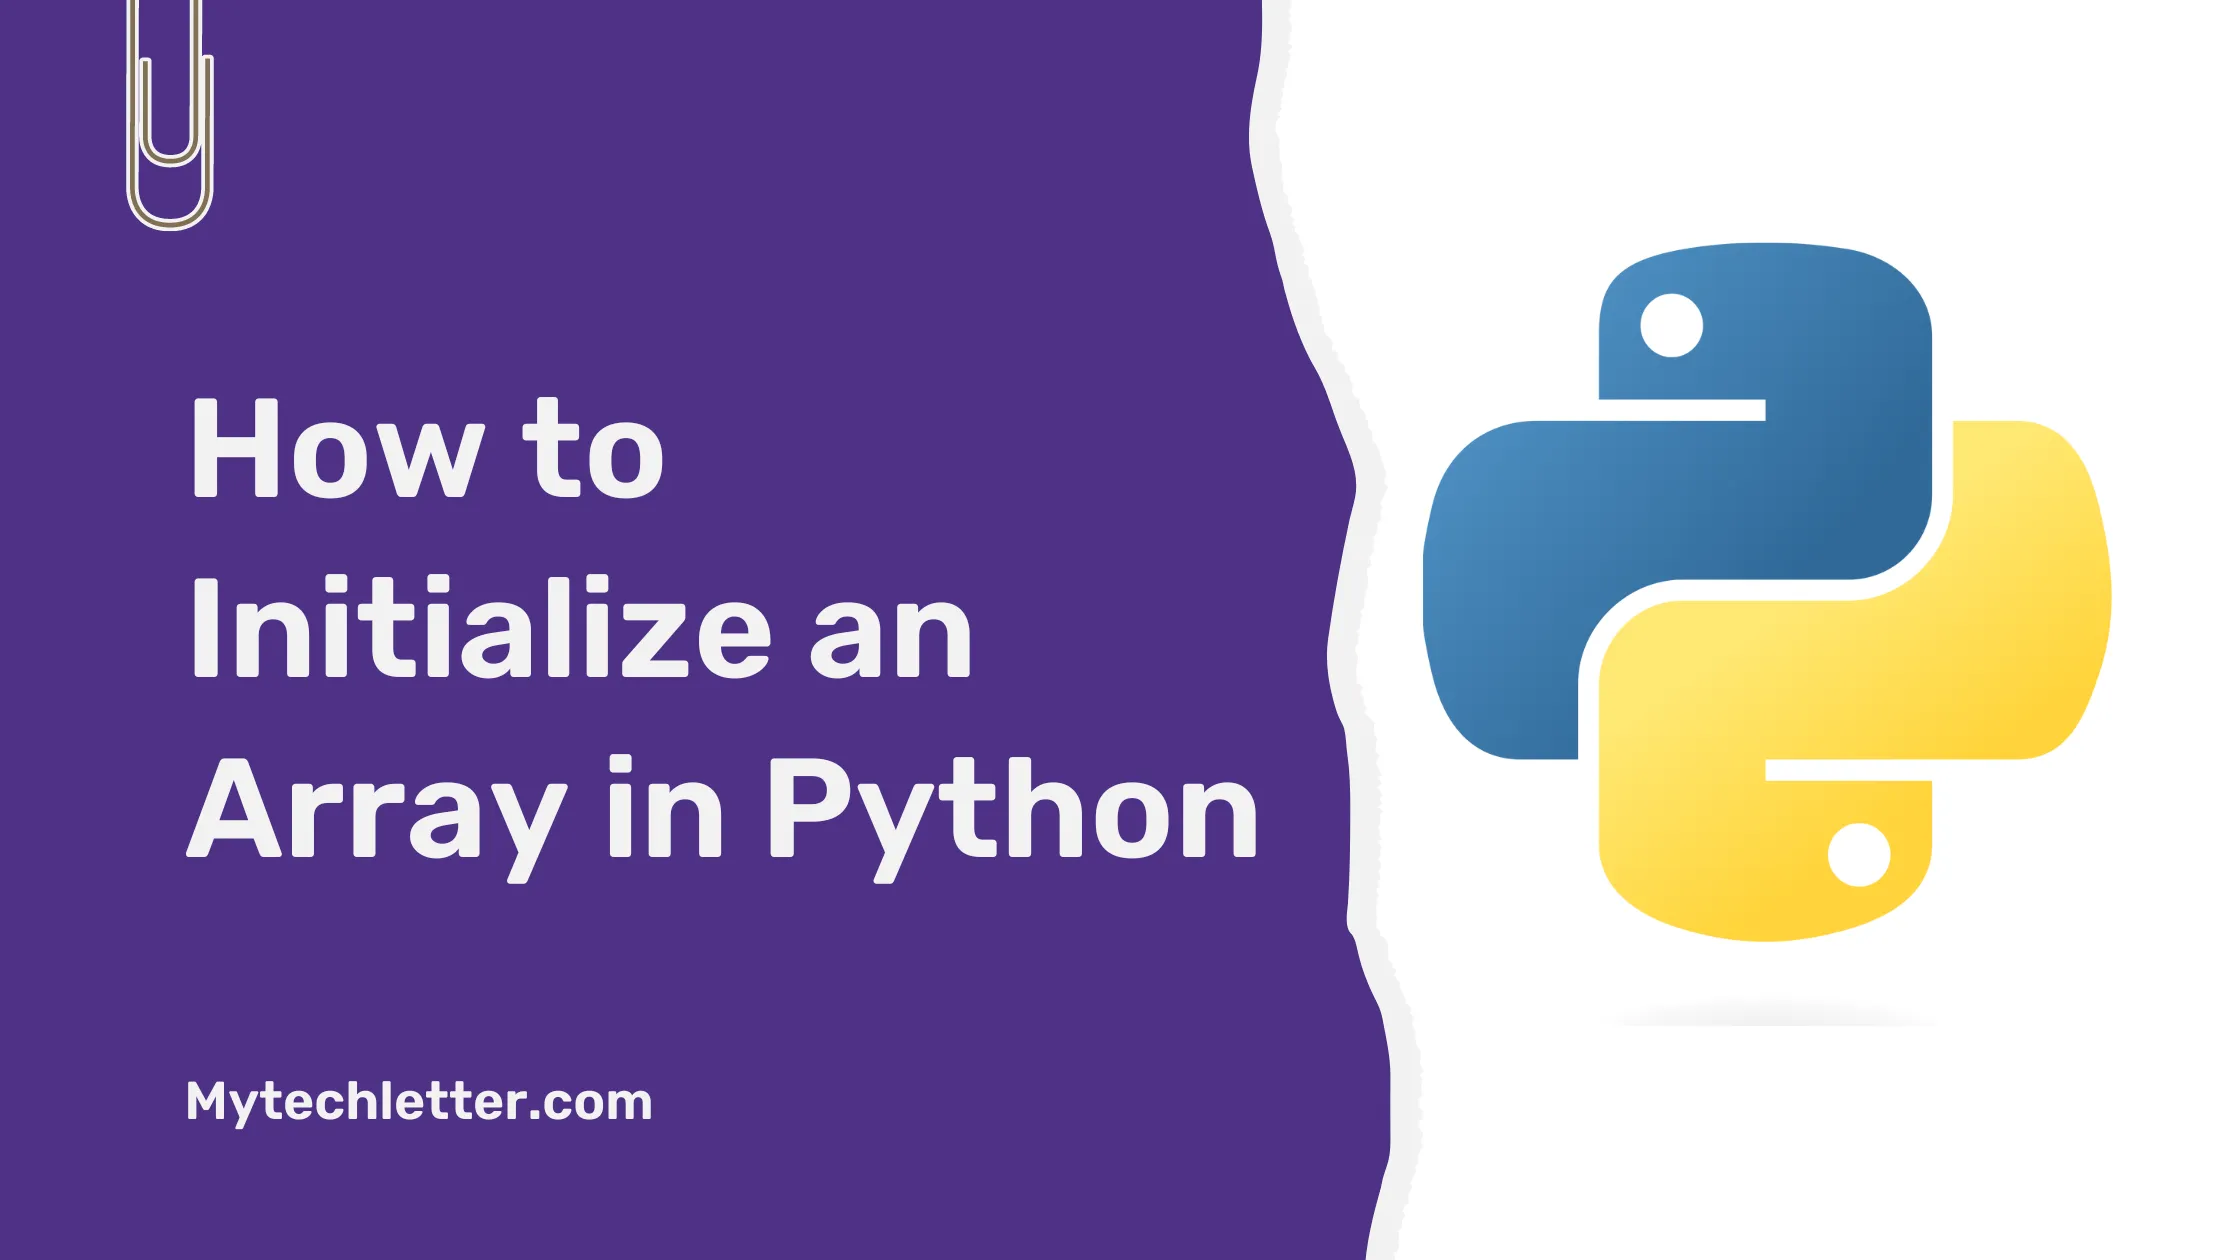 How to Initialize an Array in Python